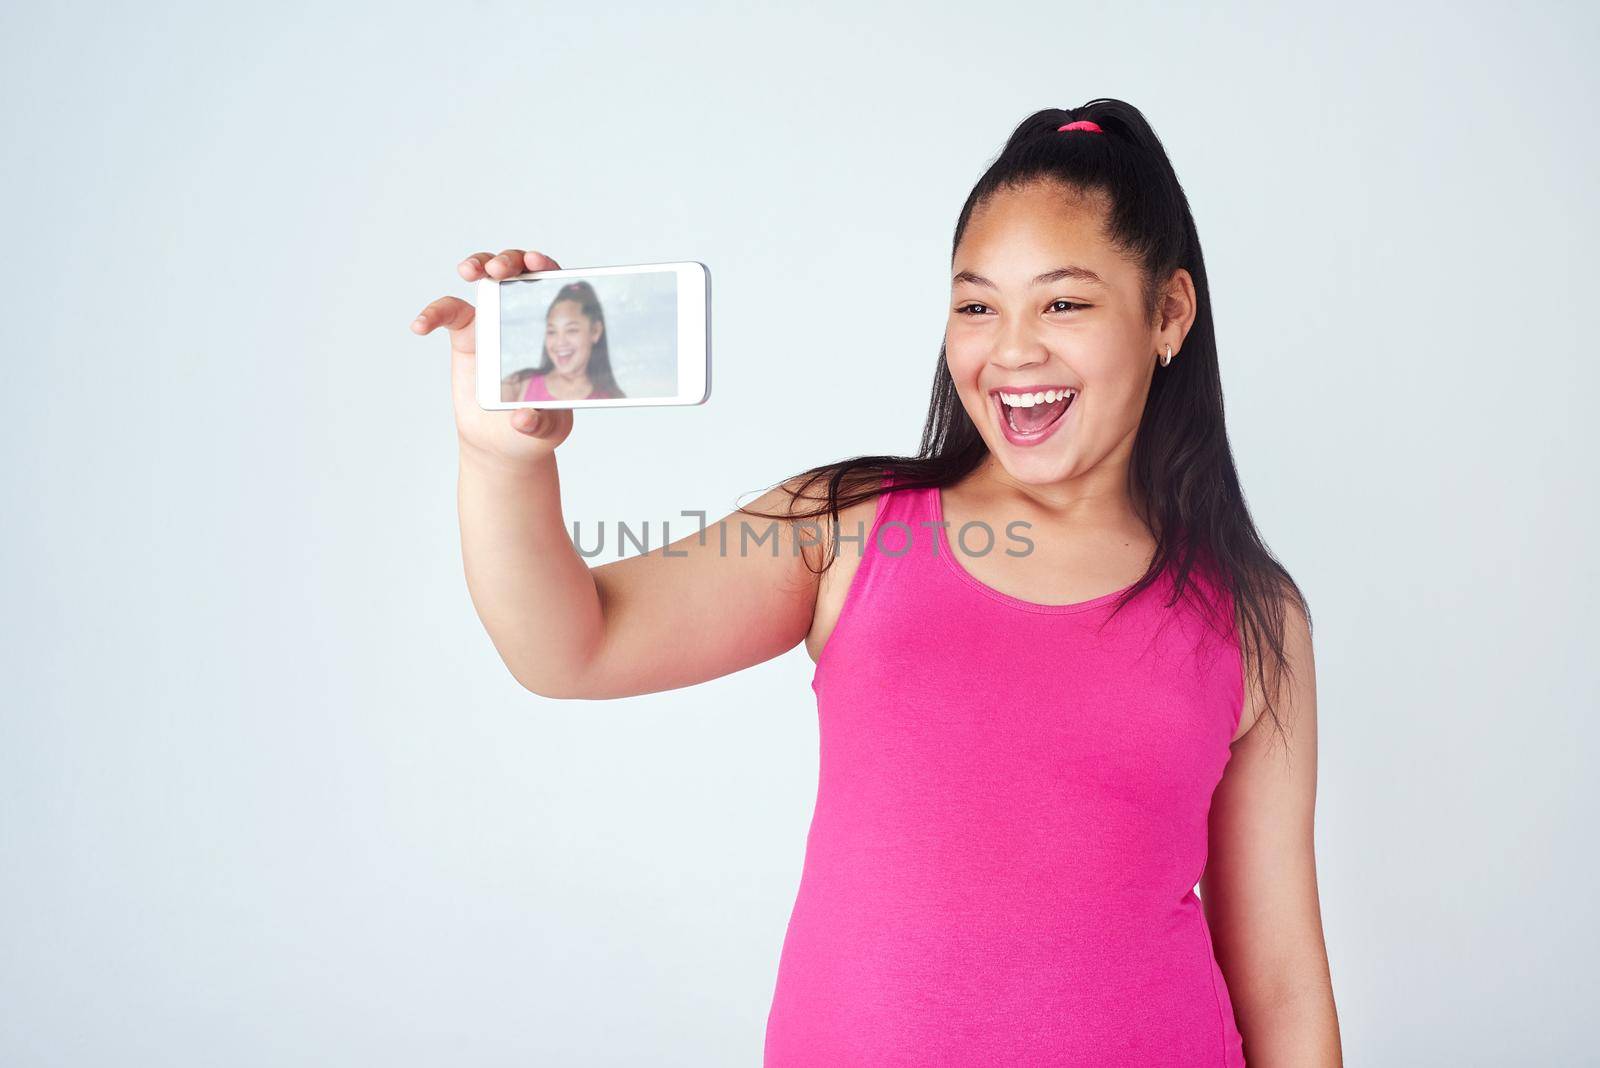 Studio shot of a cute young girl taking a selfie with a mobile phone against a gray background.